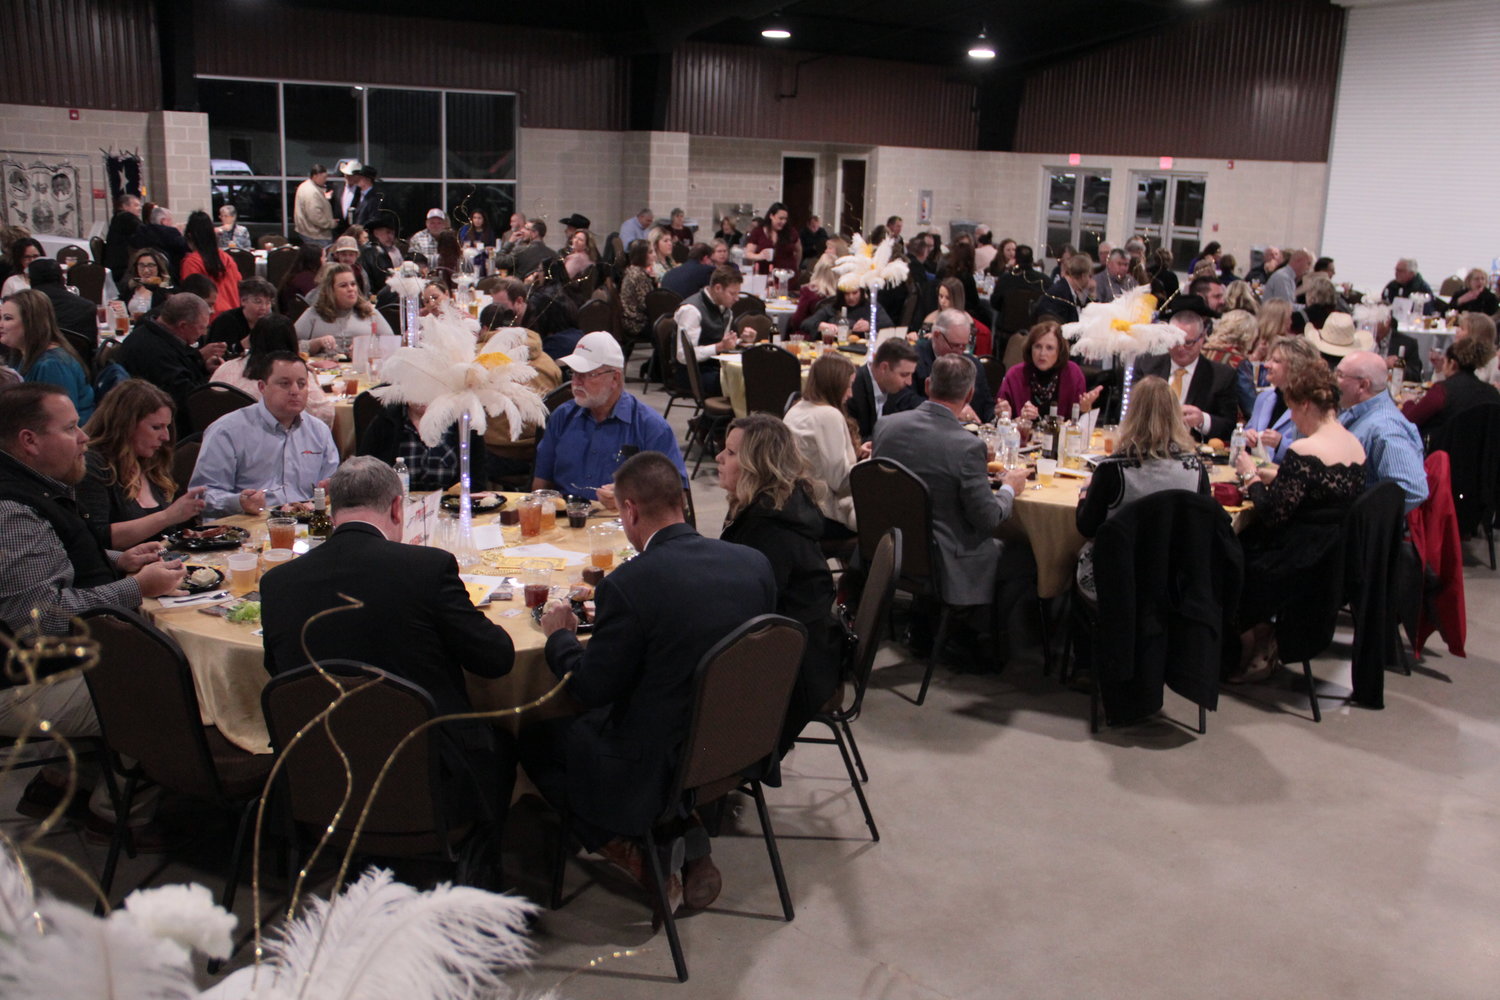 A full house was in attendance at the J.B. Wells Expo Center.